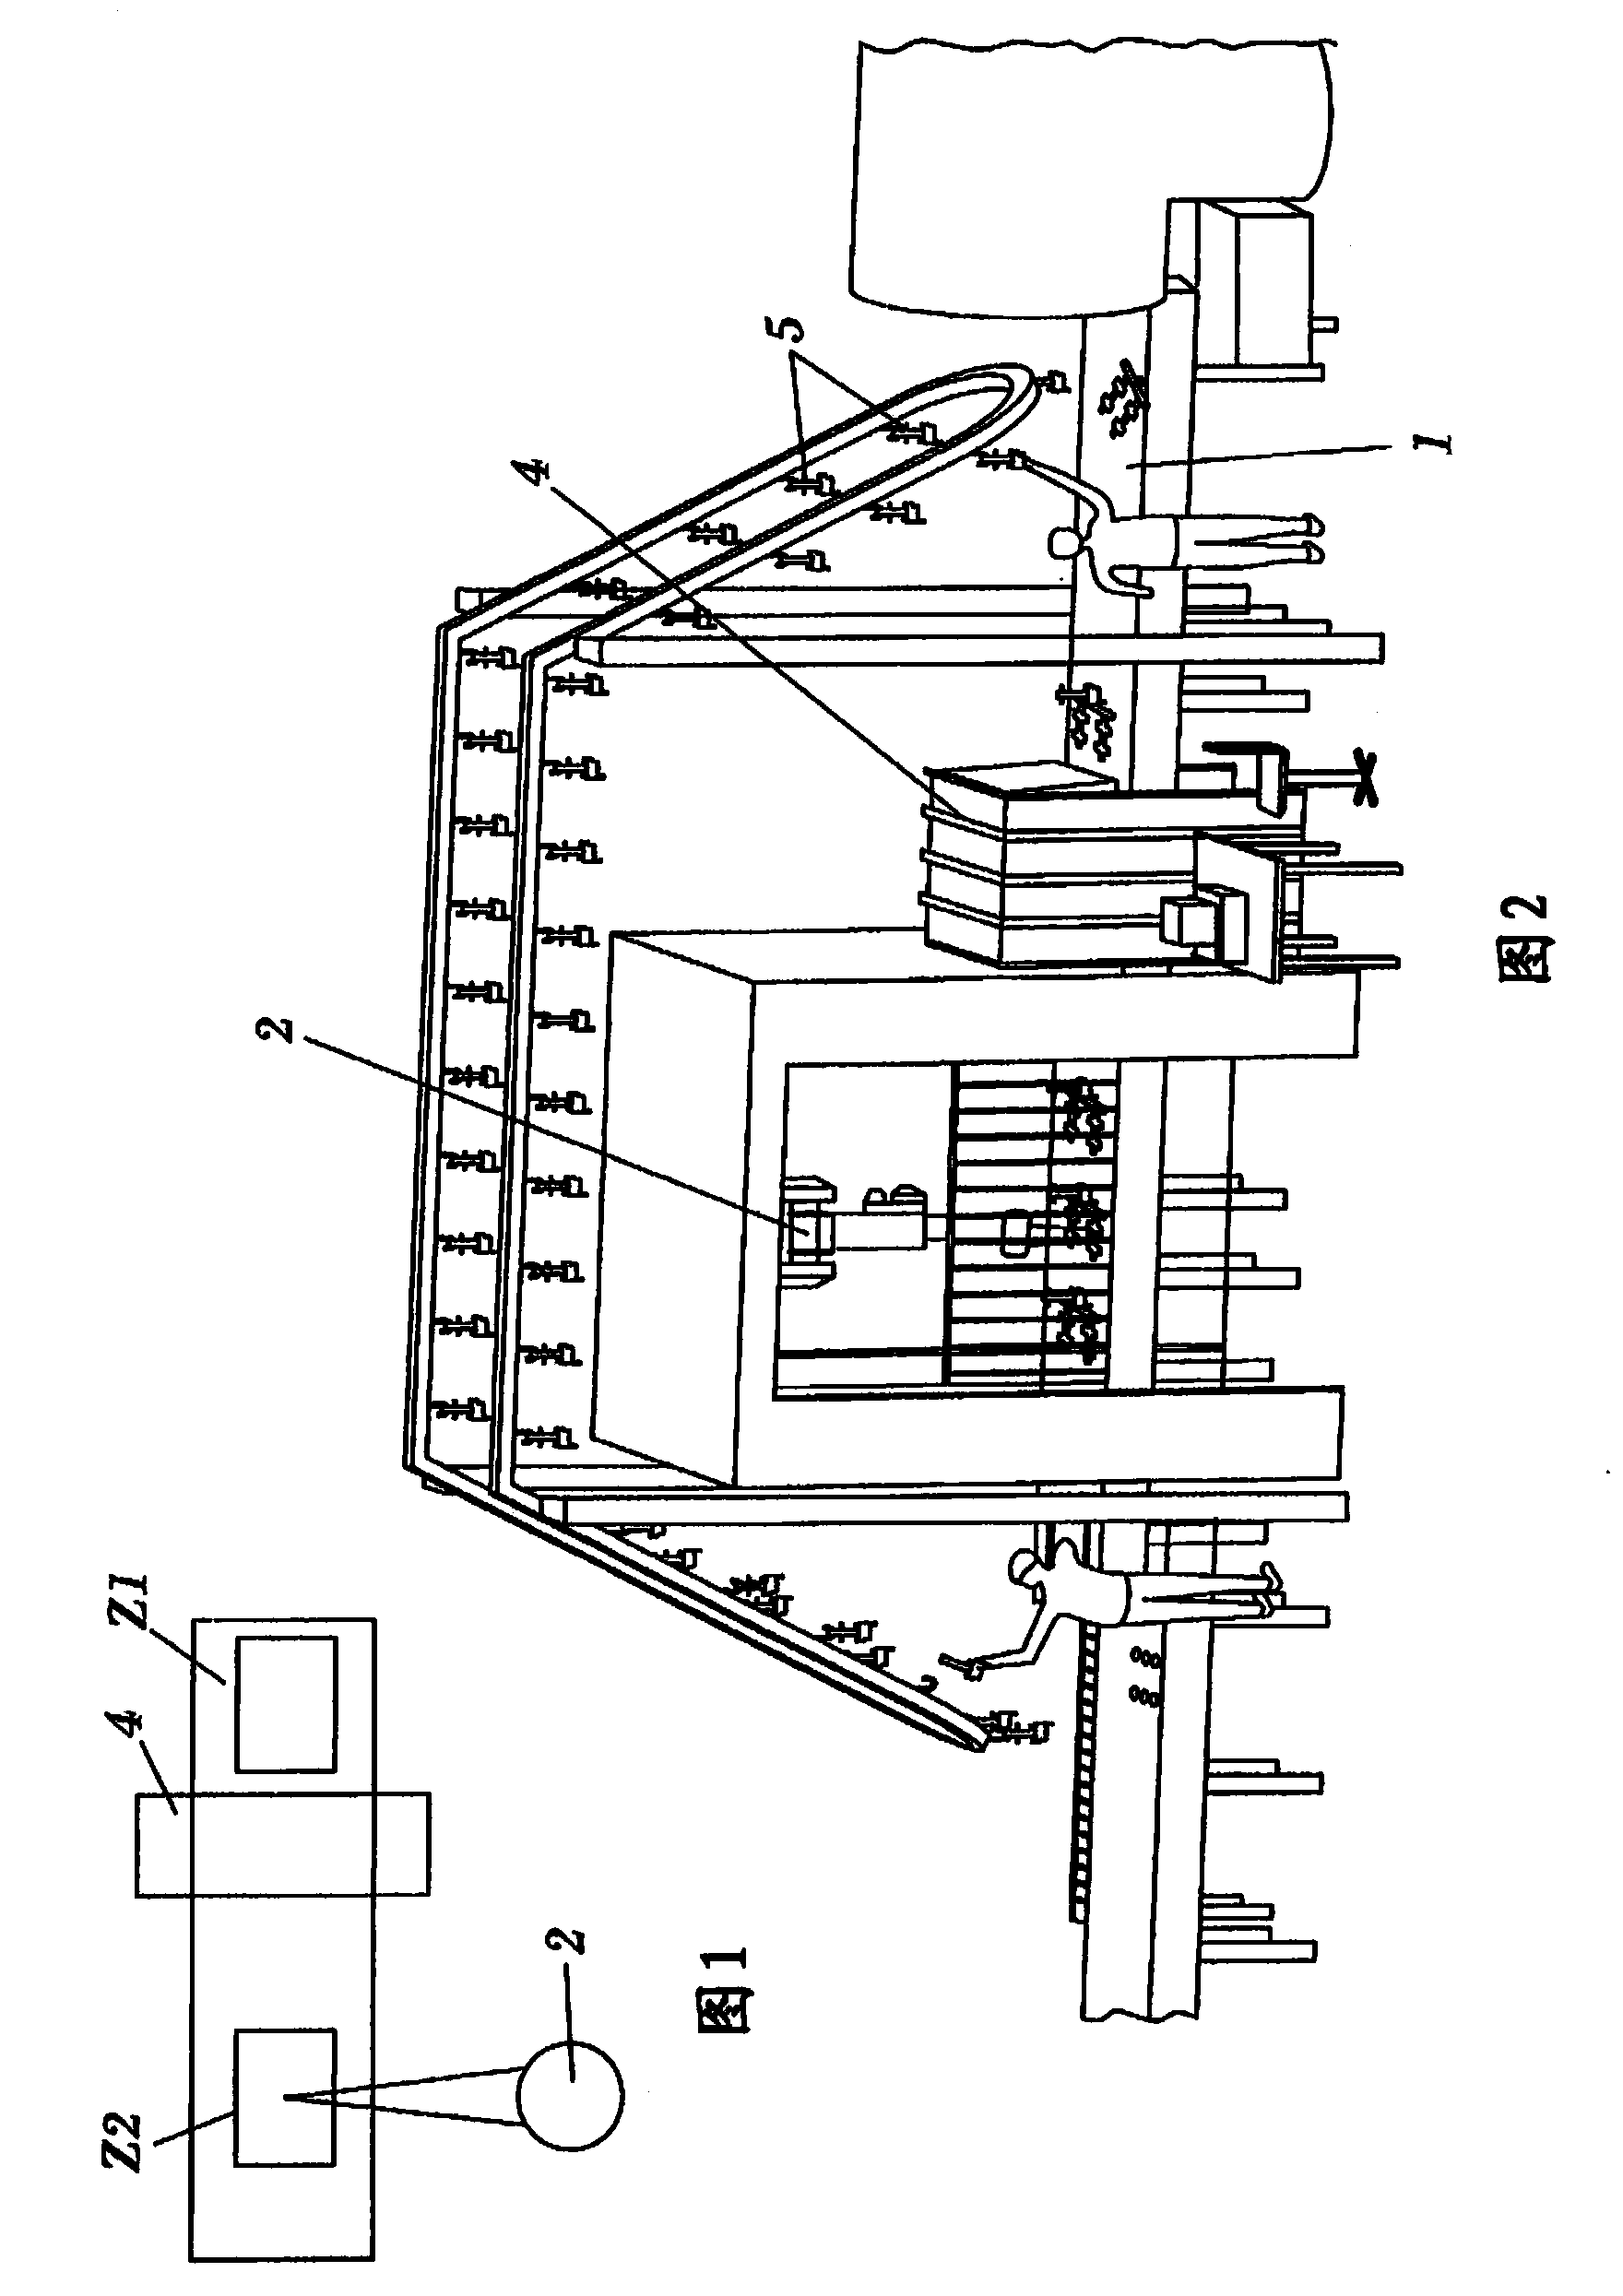 Method and system for separating cast parts from bunches obtained using casting processes